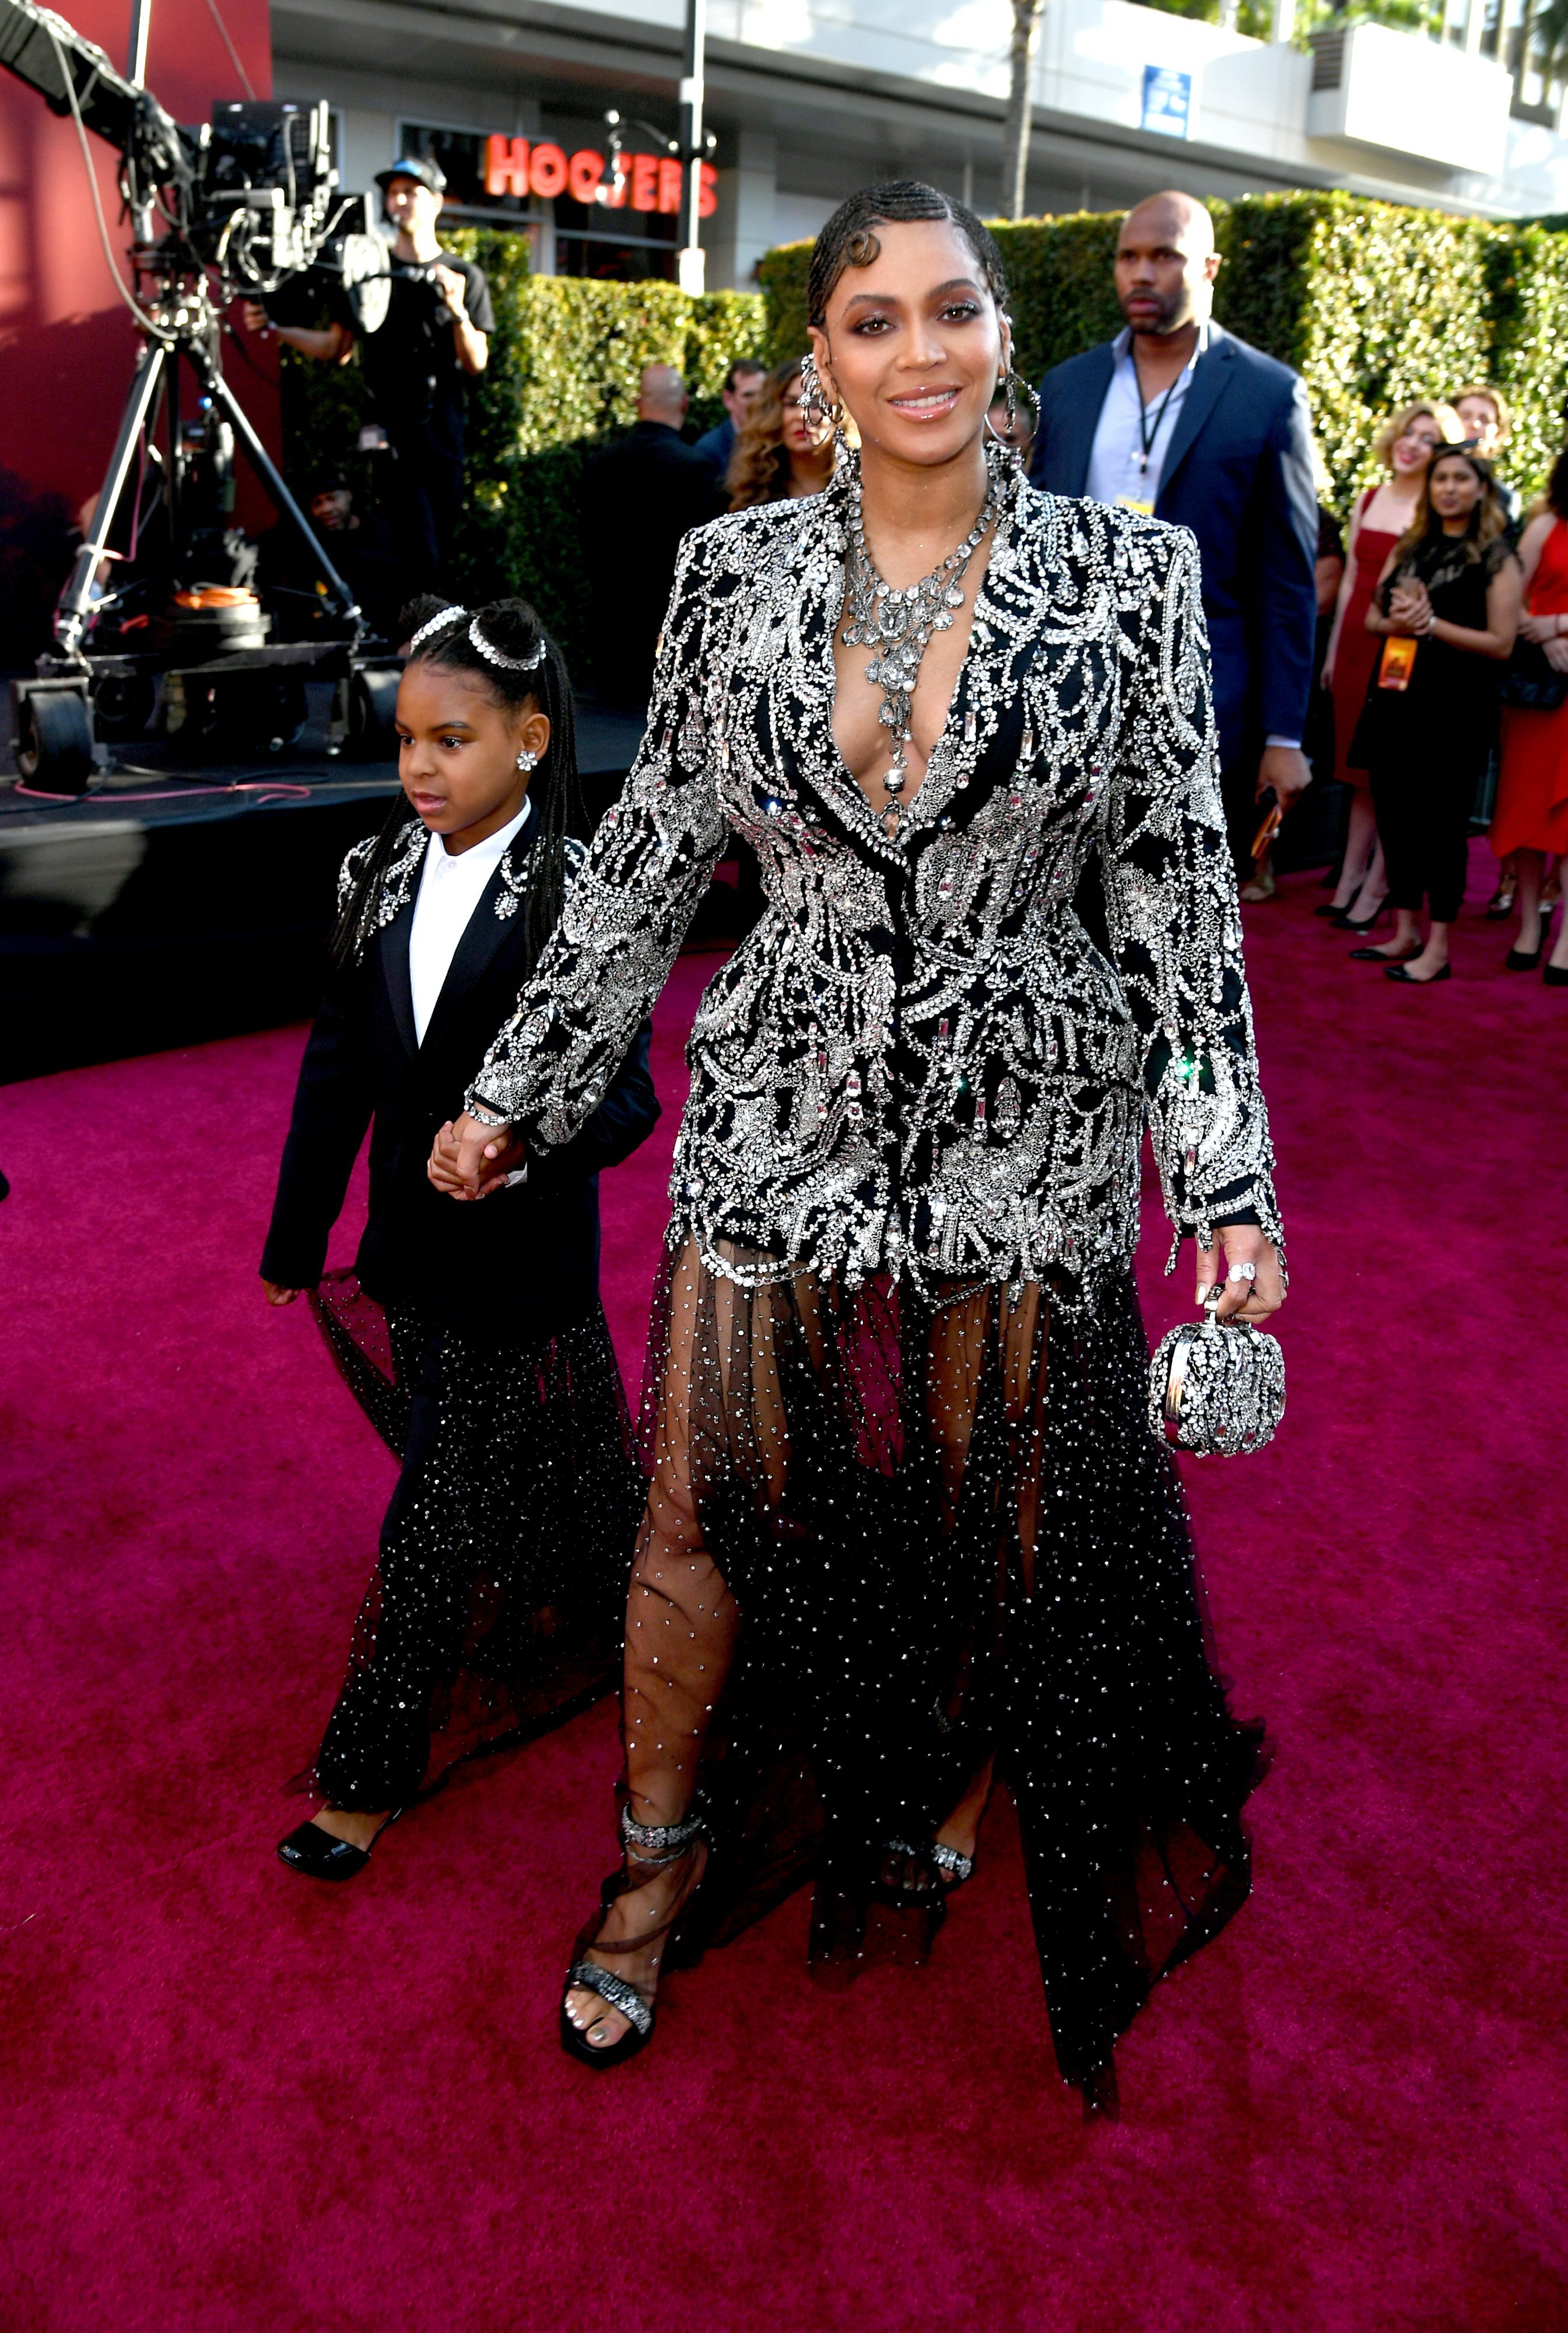 Blue Ivy Carter escorts her mother, Beyonce Knowles at the Hollywood premiere of "The Lion King" where the singer portrays Nala. | Source: Getty